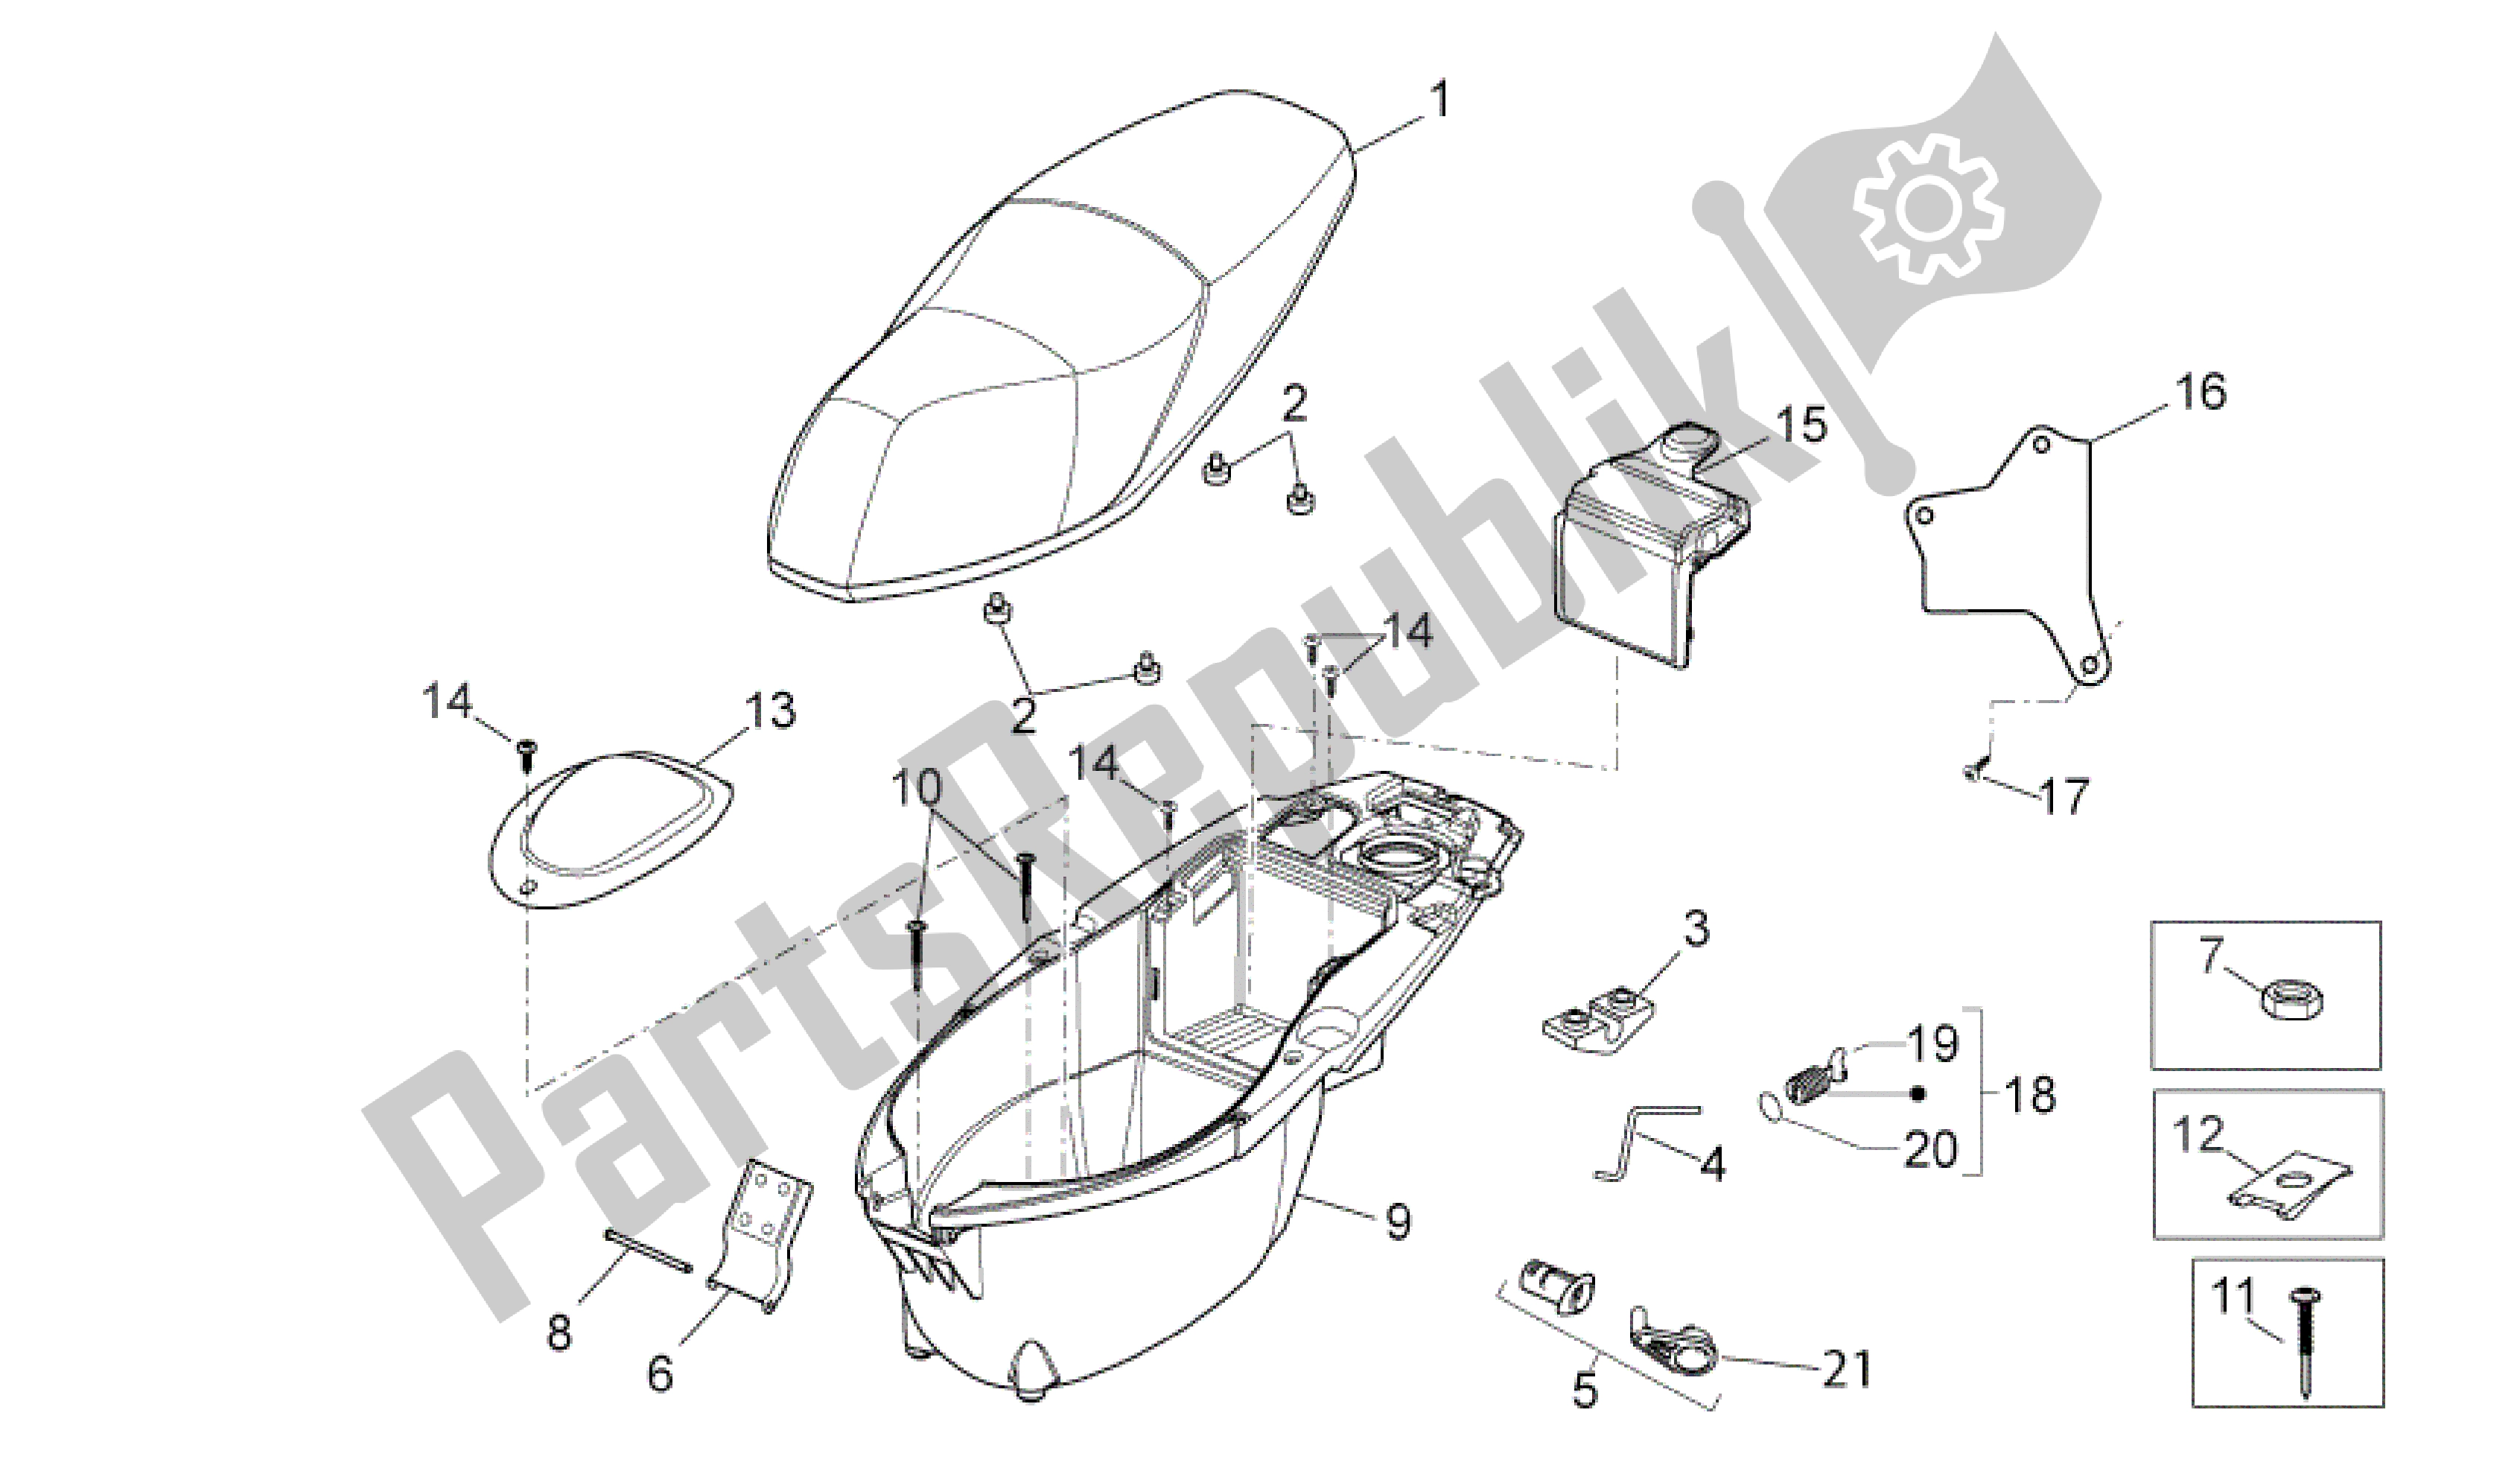 All parts for the Central Body Iii of the Aprilia Sport City 125 2008 - 2010